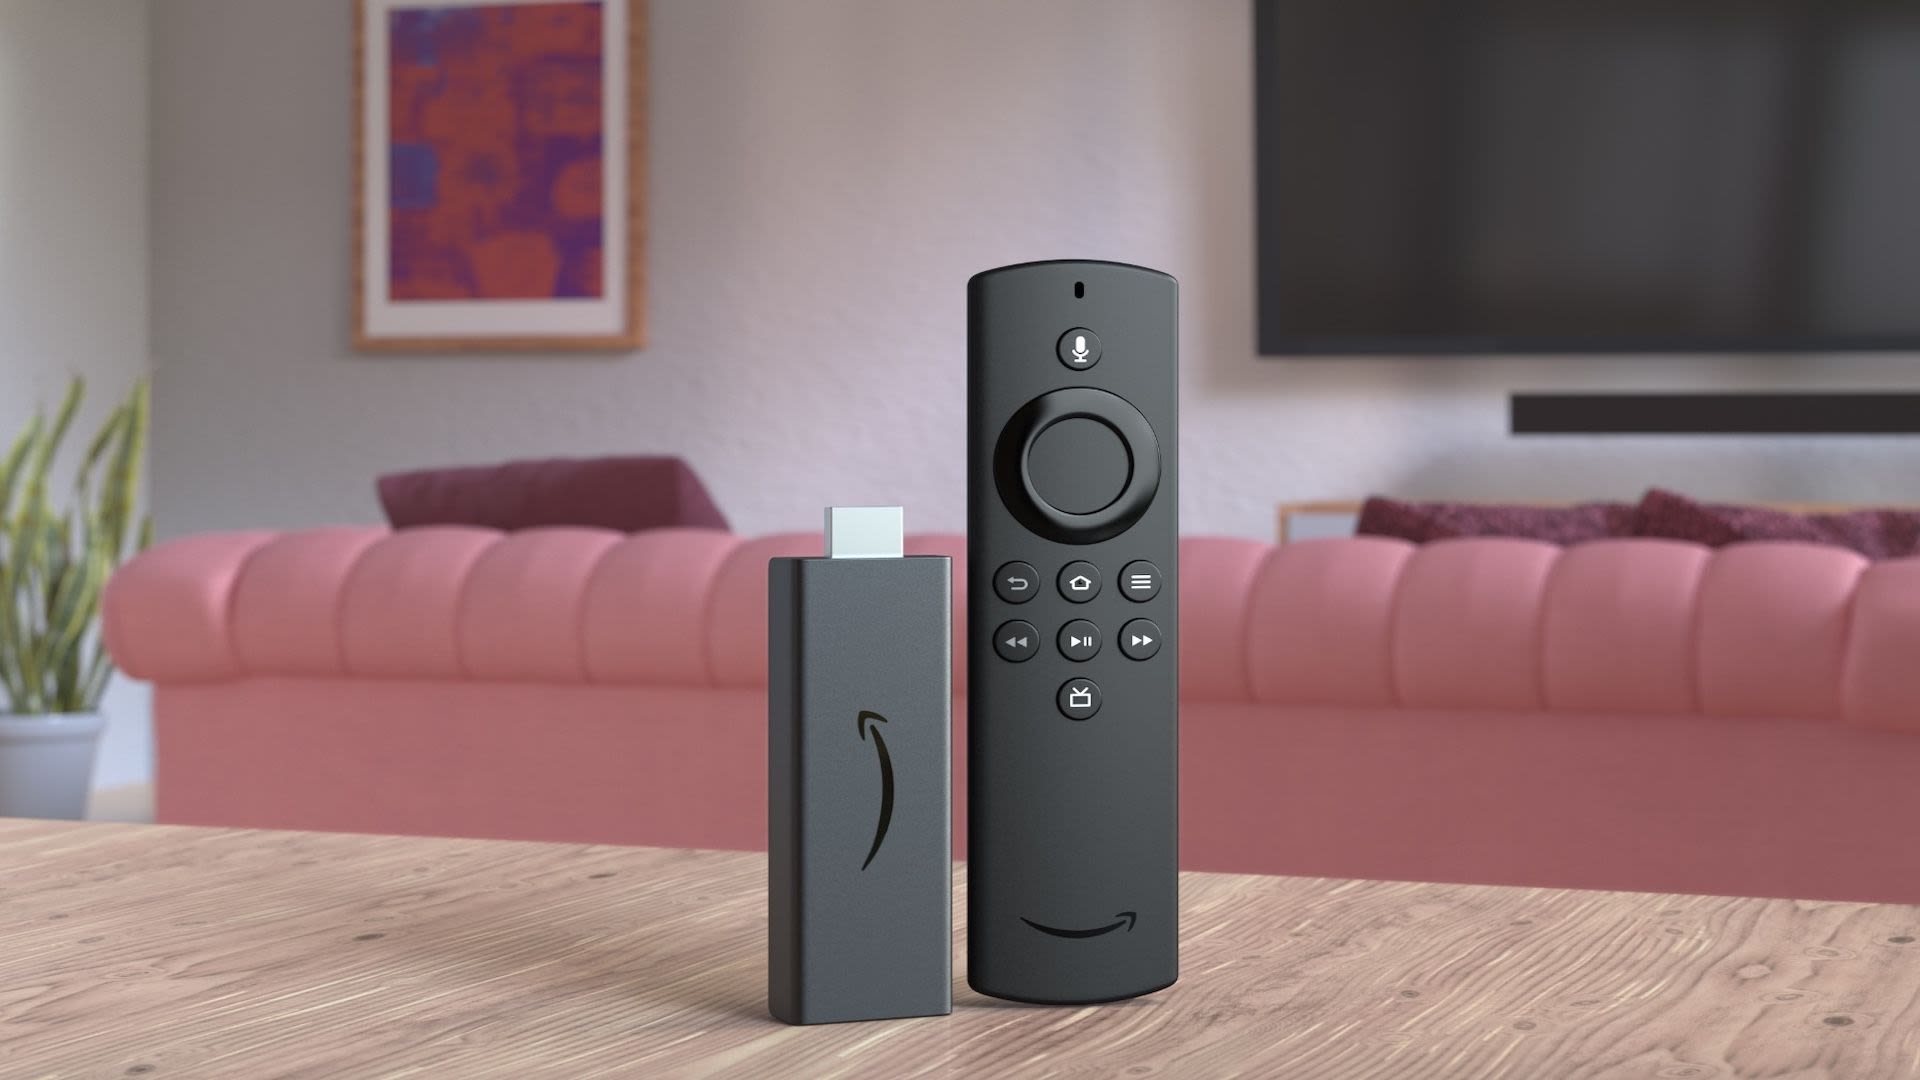 Amazon Fire TV stick: How to cast shows from your Android phone or tablet